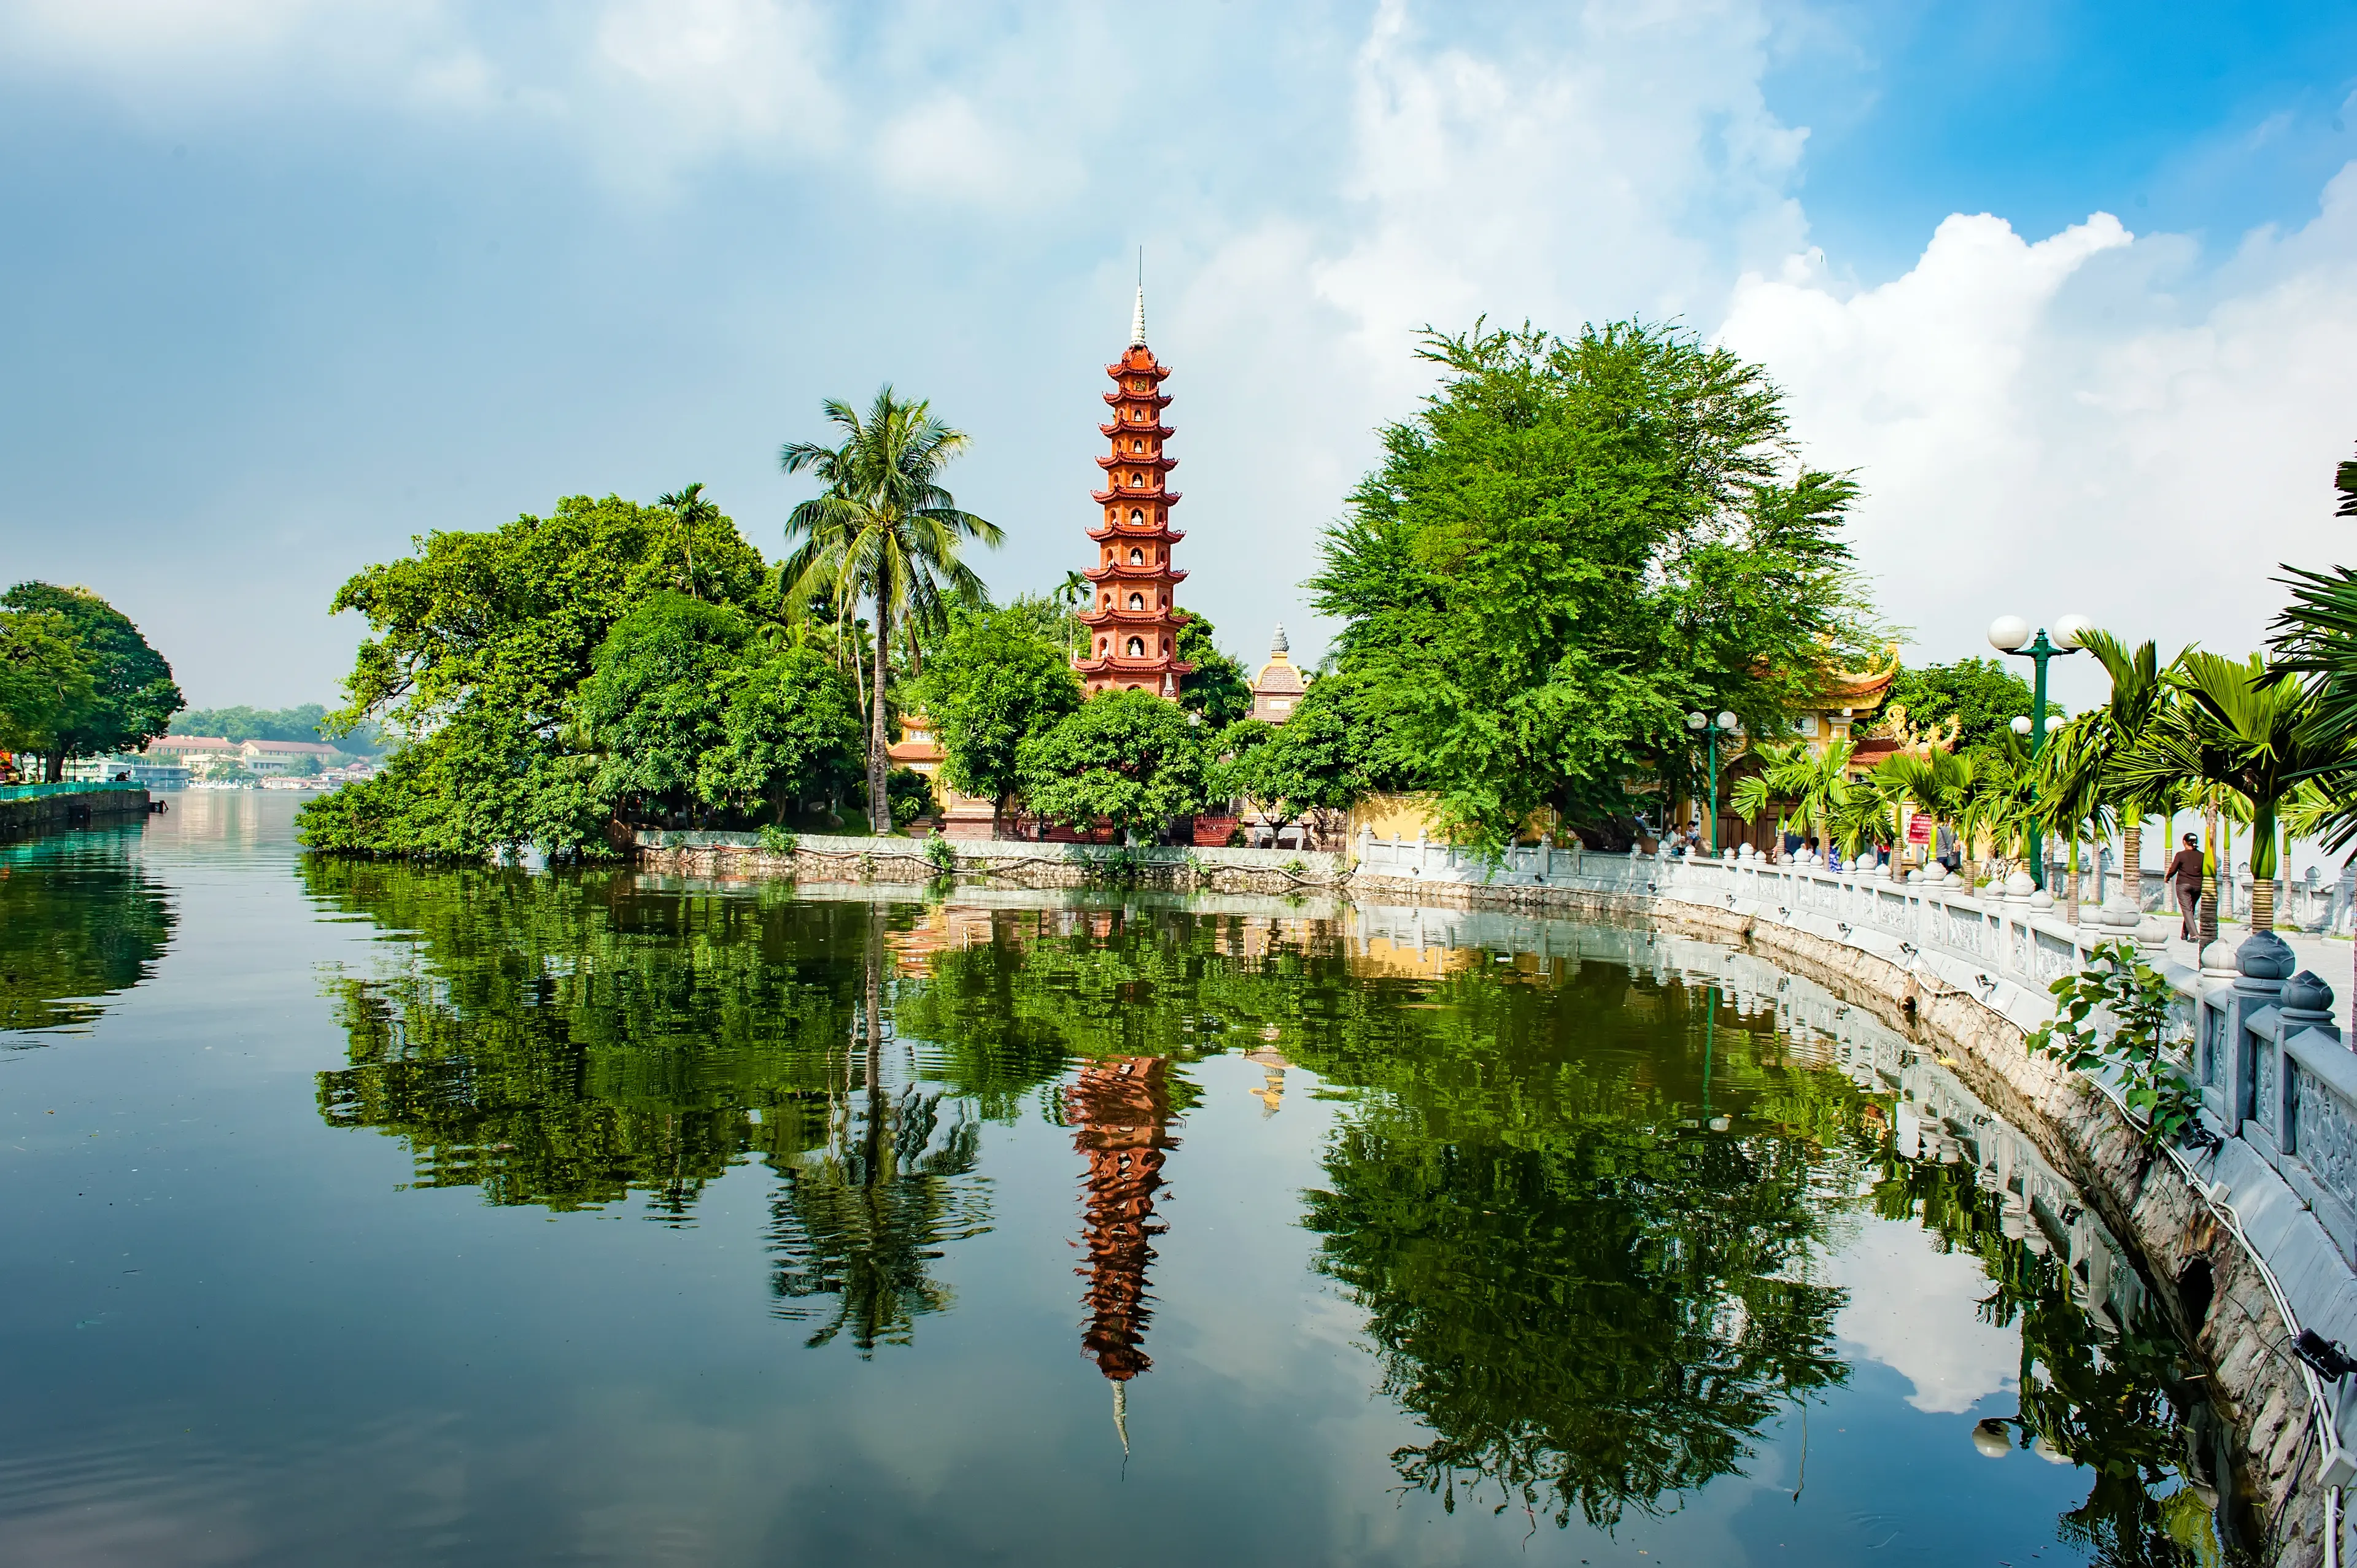 3-Day Hanoi Adventure: Sightseeing, Outdoors, and Relaxation